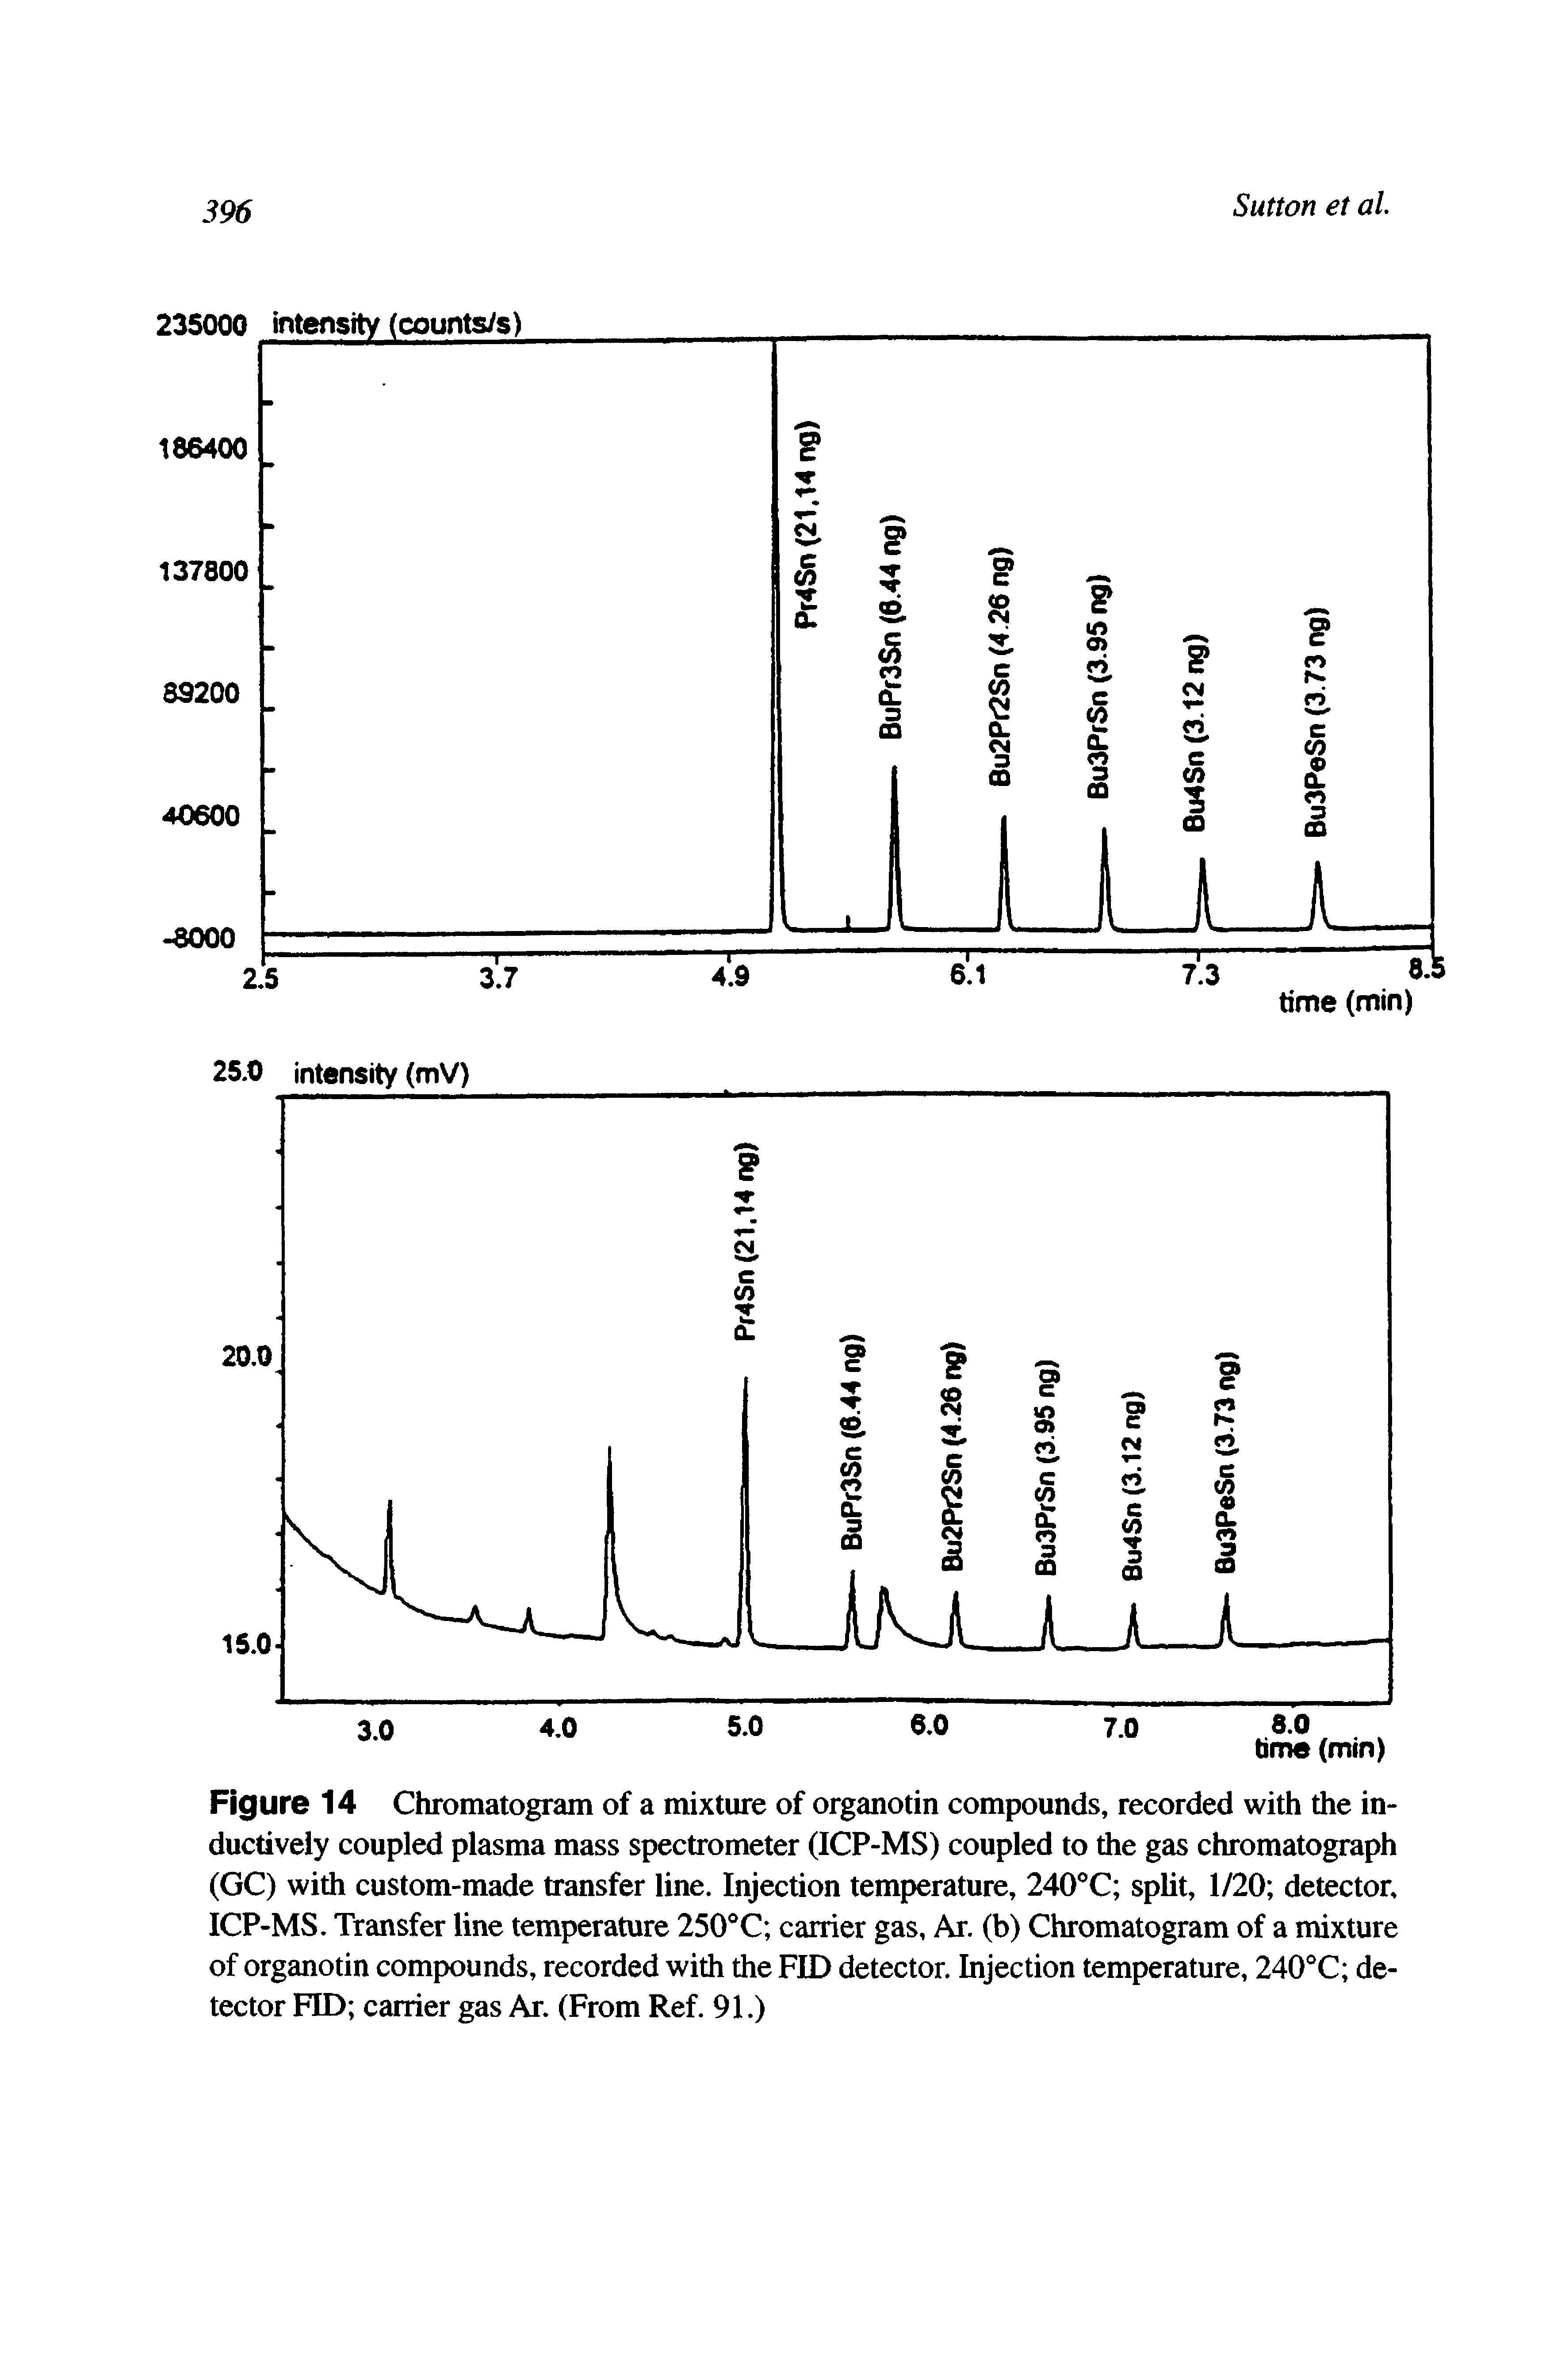 Figure 14 Chromatogram of a mixture of organotin compounds, recorded with the inductively coupled plasma mass spectrometer (ICP-MS) coupled to the gas chromatograph (GC) with custom-made transfer line. Injection temperature, 240°C split, 1/20 detector, ICP-MS. Transfer line temperature 250°C carrier gas, Ar. (b) Chromatogram of a mixture of organotin compounds, recorded with the FID detector. Injection temperature, 240°C detector FID carrier gas Ar. (From Ref. 91.)...